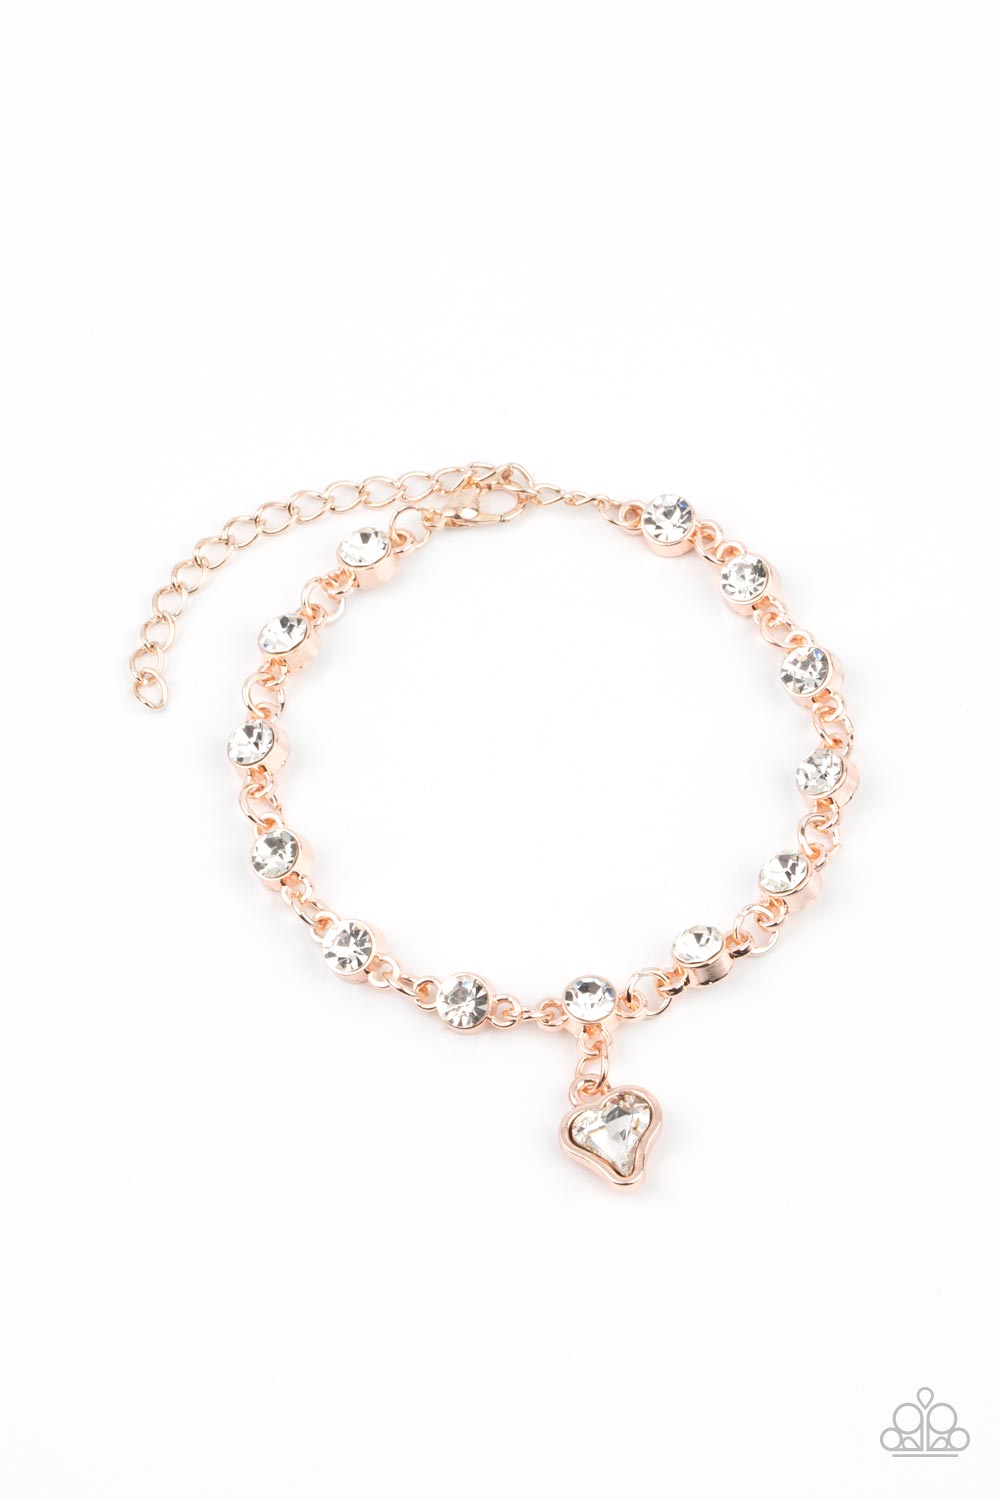 Sweet Sixteen Rose Gold Bracelet - Paparazzi Accessories  Brilliant white rhinestones in rose gold settings are linked together and accented with a charming white rhinestone heart that dangles sweetly from the wrist. Features an adjustable clasp closure.  All Paparazzi Accessories are lead free and nickel free!  Sold as one individual bracelet.